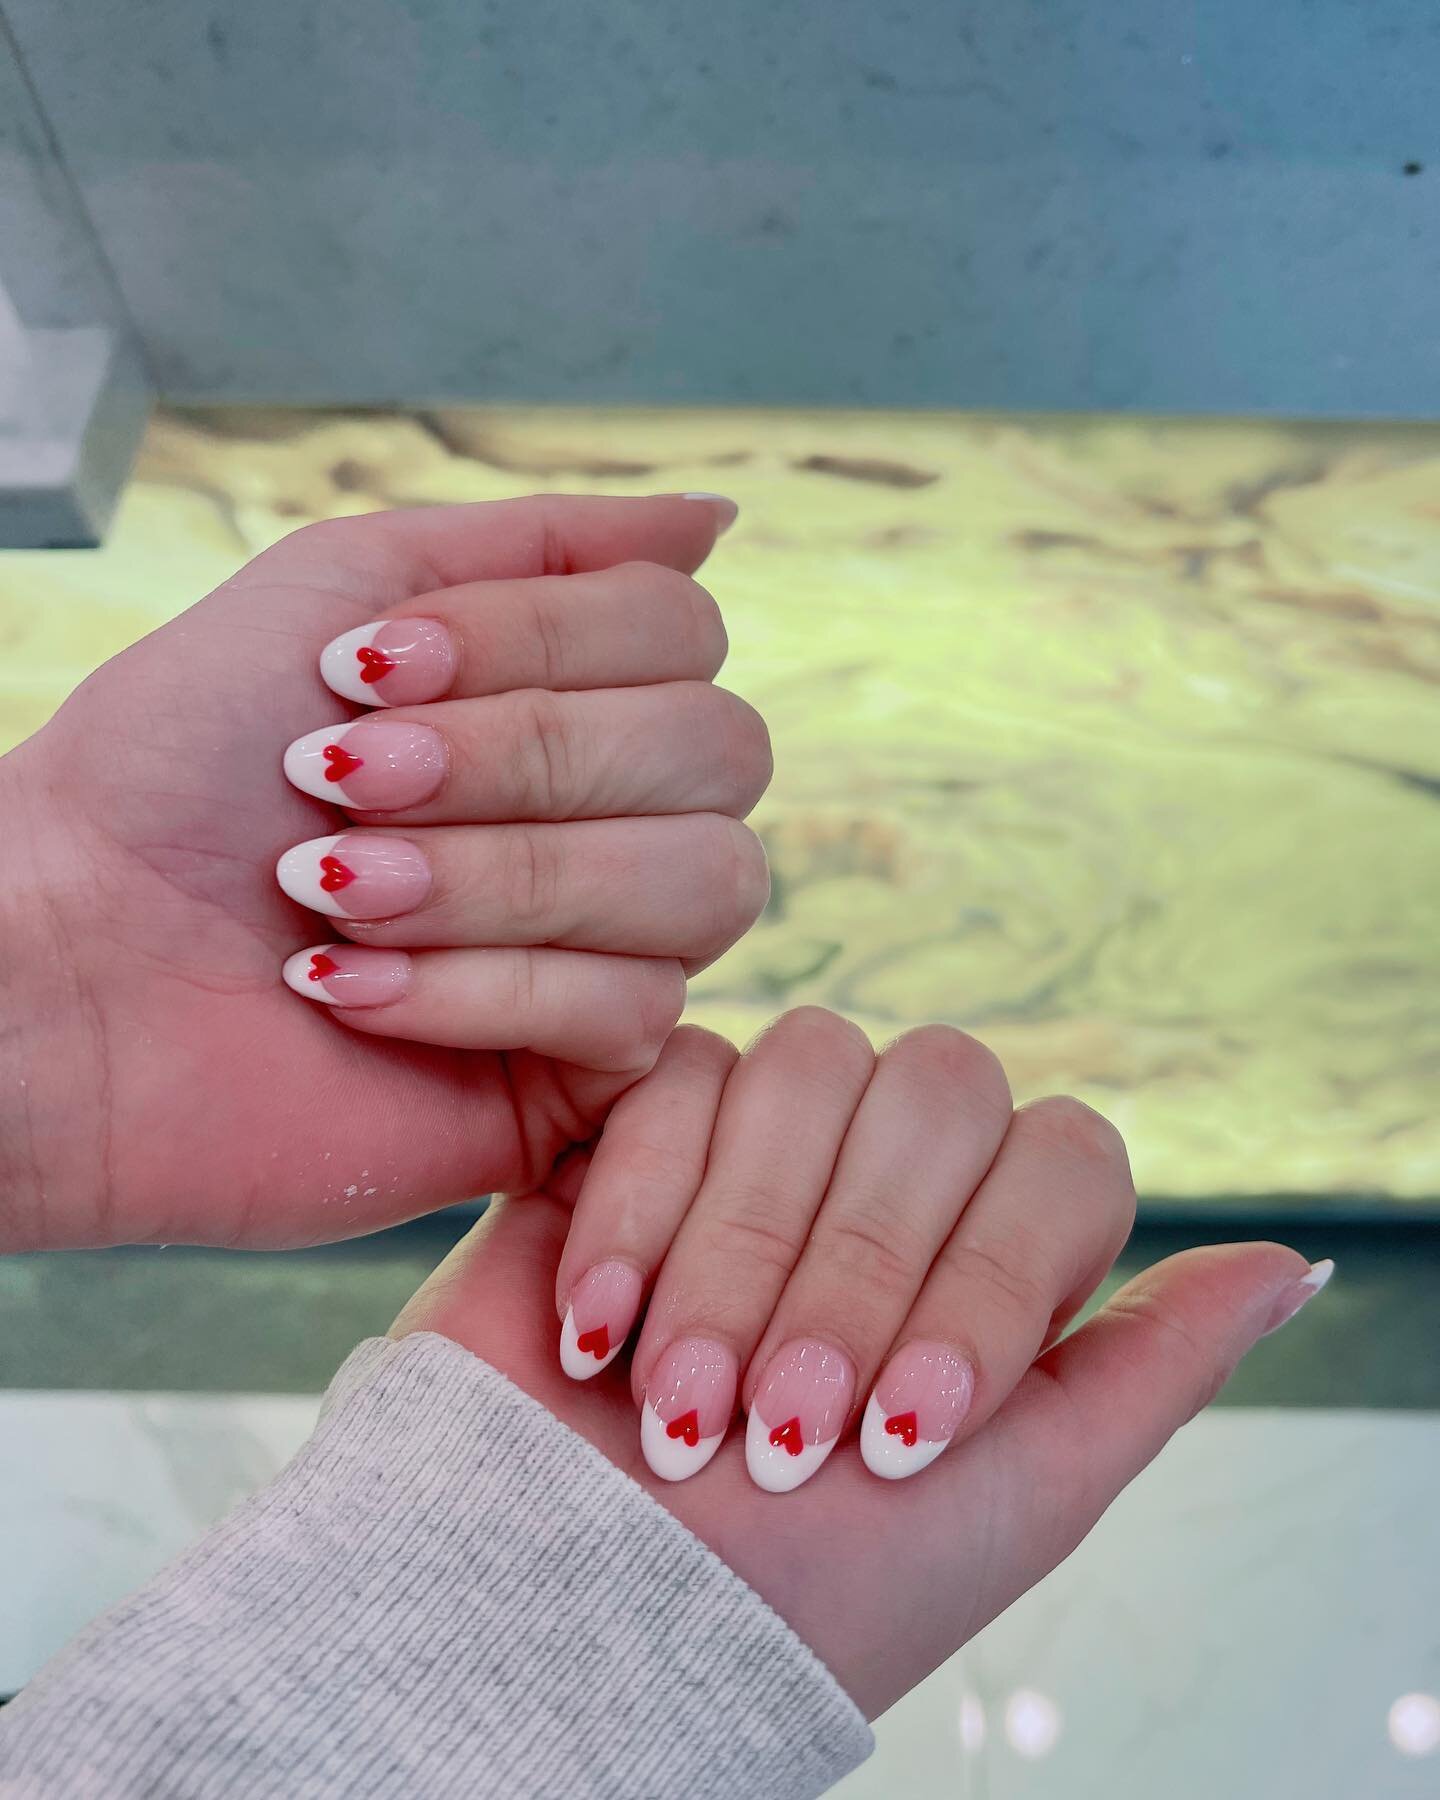 we&rsquo;re feeling all of the love in the air 💞 come by for your valentine&rsquo;s day nails before it&rsquo;s too late! 

#blumnailbar #nails #nailart #trendynailsalon #nailsofinstagram #manicure #naildesigns #nailstyles #athensga #trendynails #op